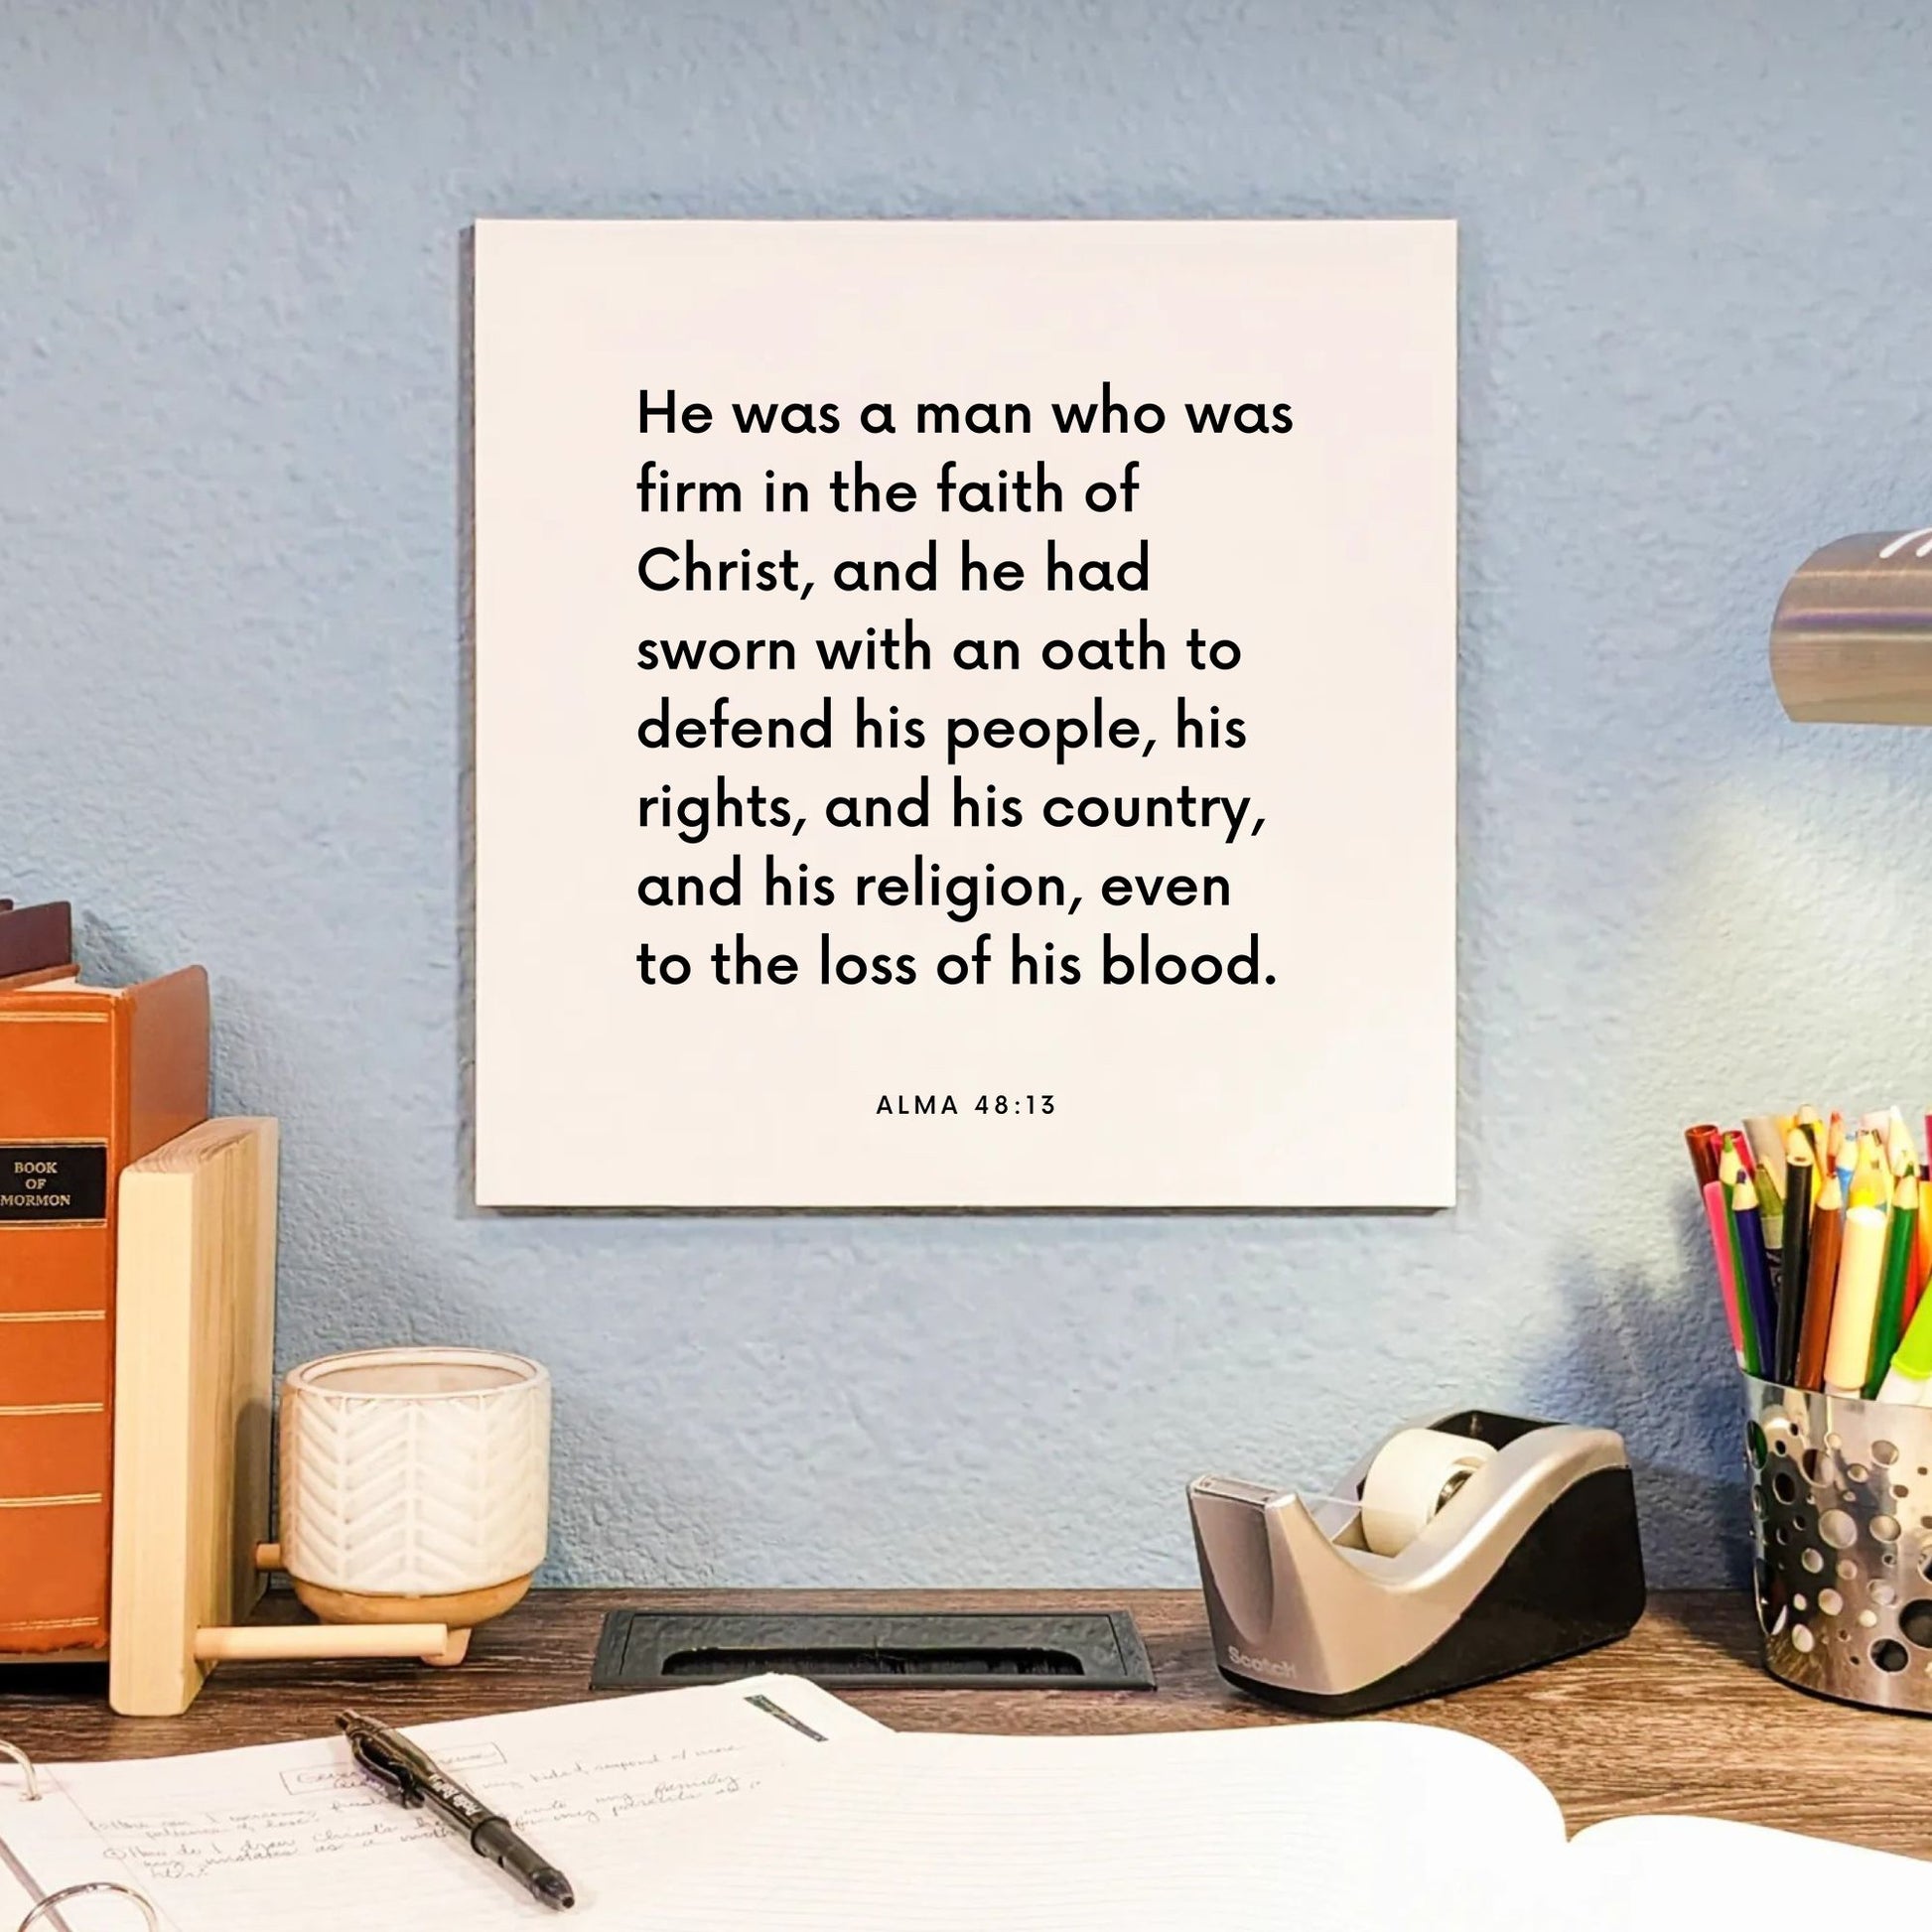 Desk mouting of the scripture tile for Alma 48:13 - "He was a man who was firm in the faith of Christ"